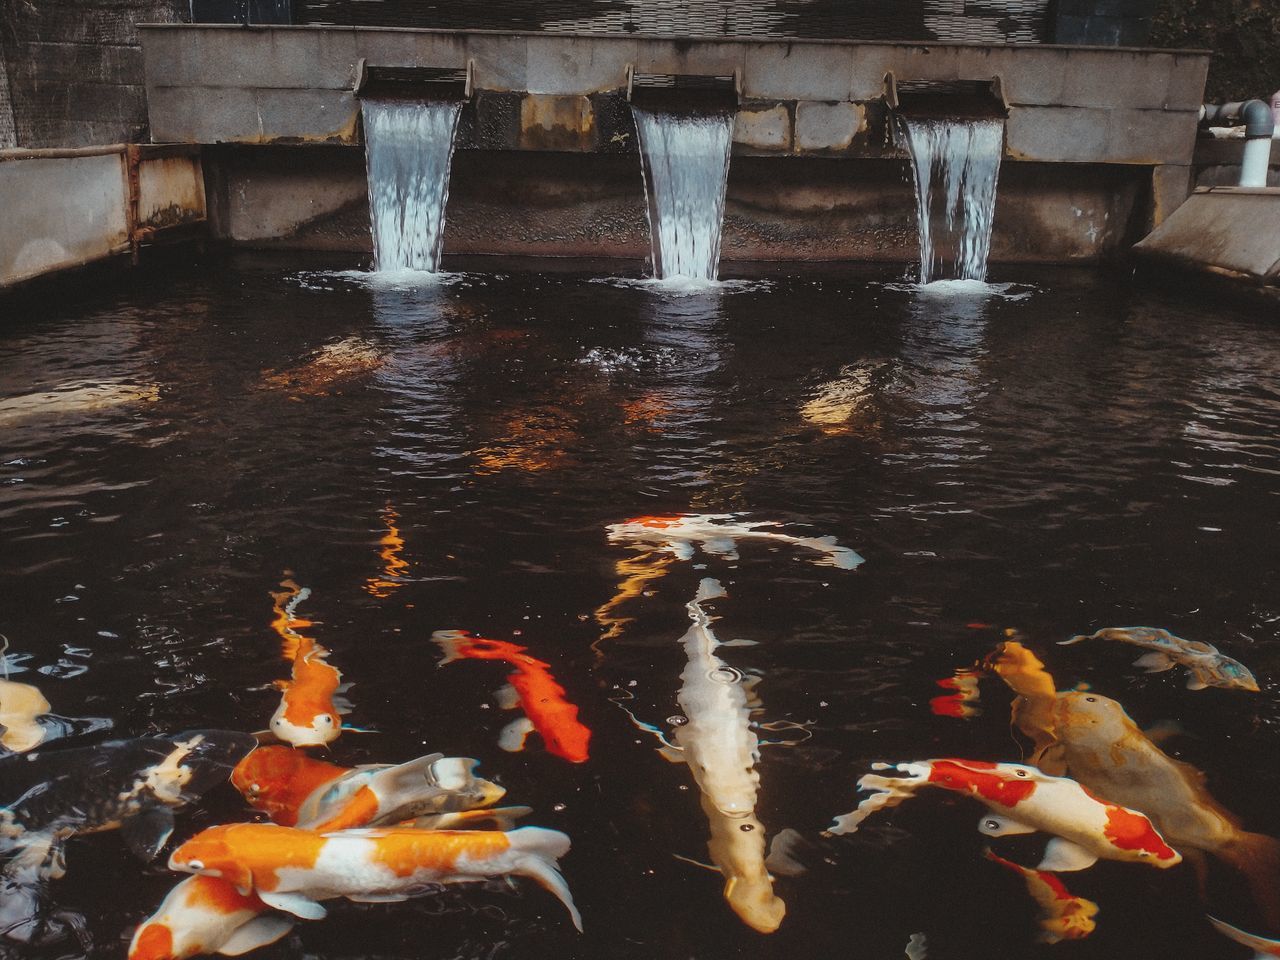 VIEW OF KOI FISH IN POND